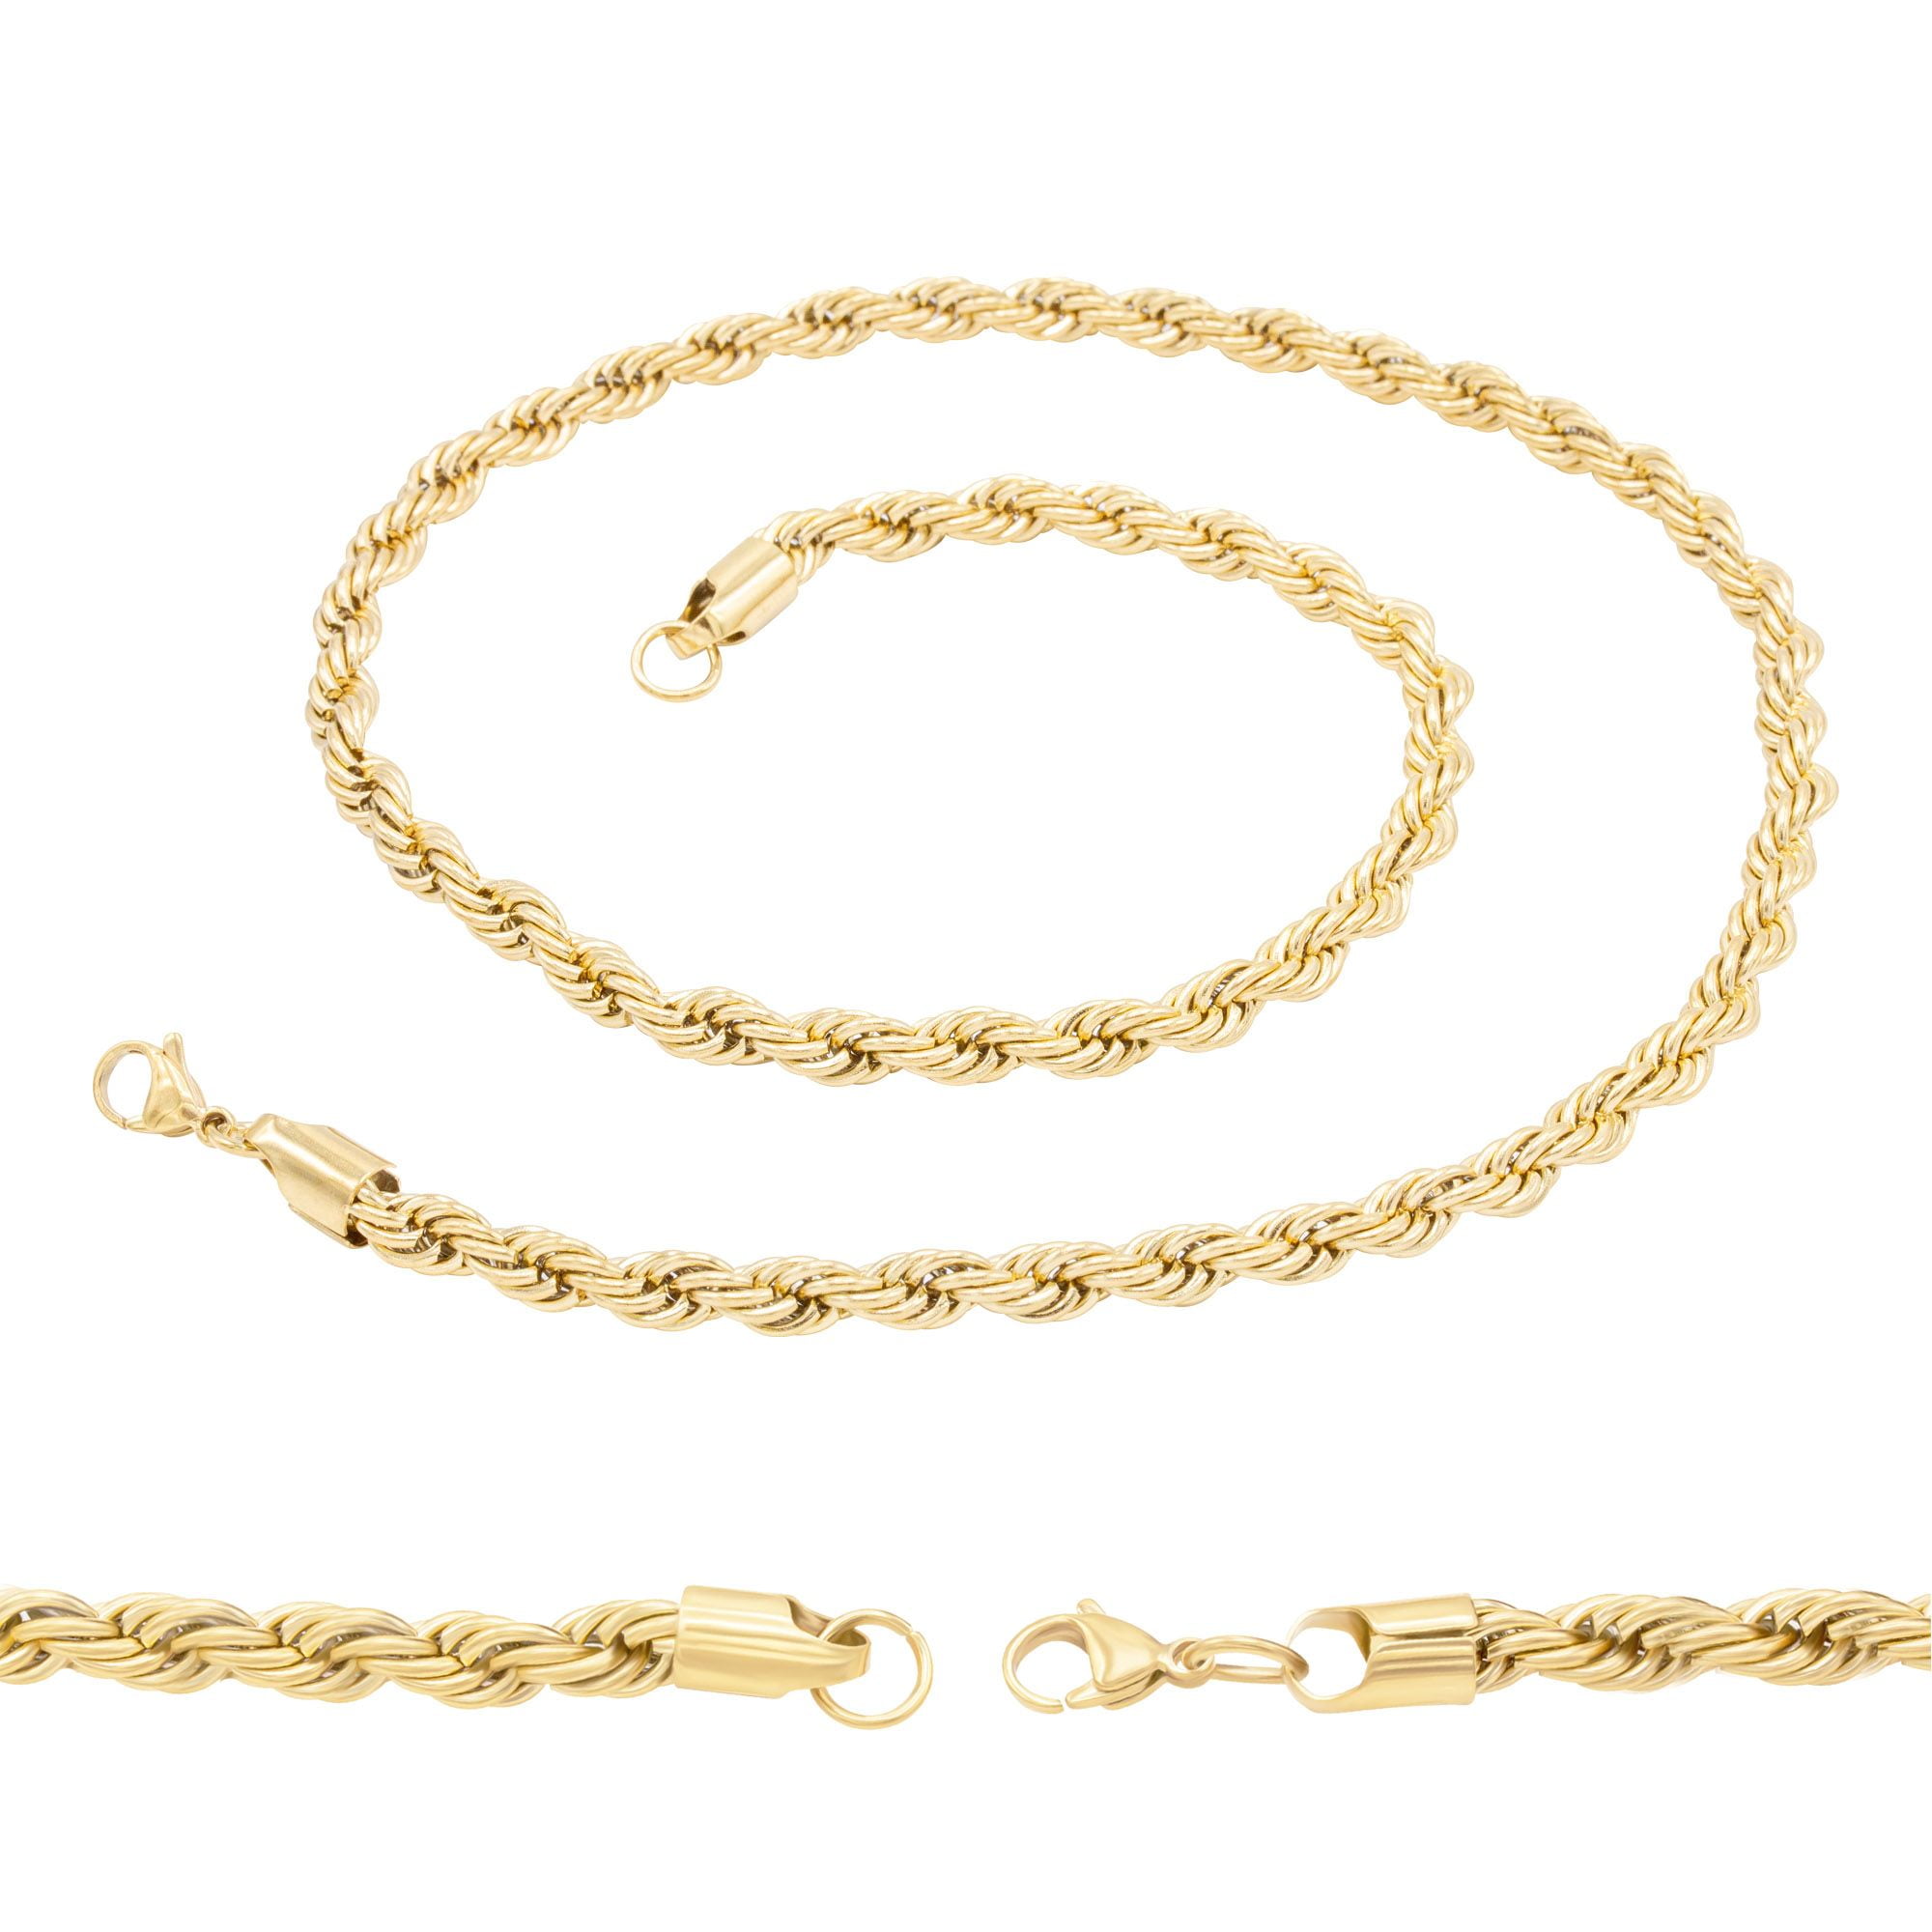 Beberlini Rope Chain 14K Gold Filled Necklace 24 inch Bracelet 8.5 inch Set Lobster Claw Clasp Jewelry Gift for Men 5 mm, Men's